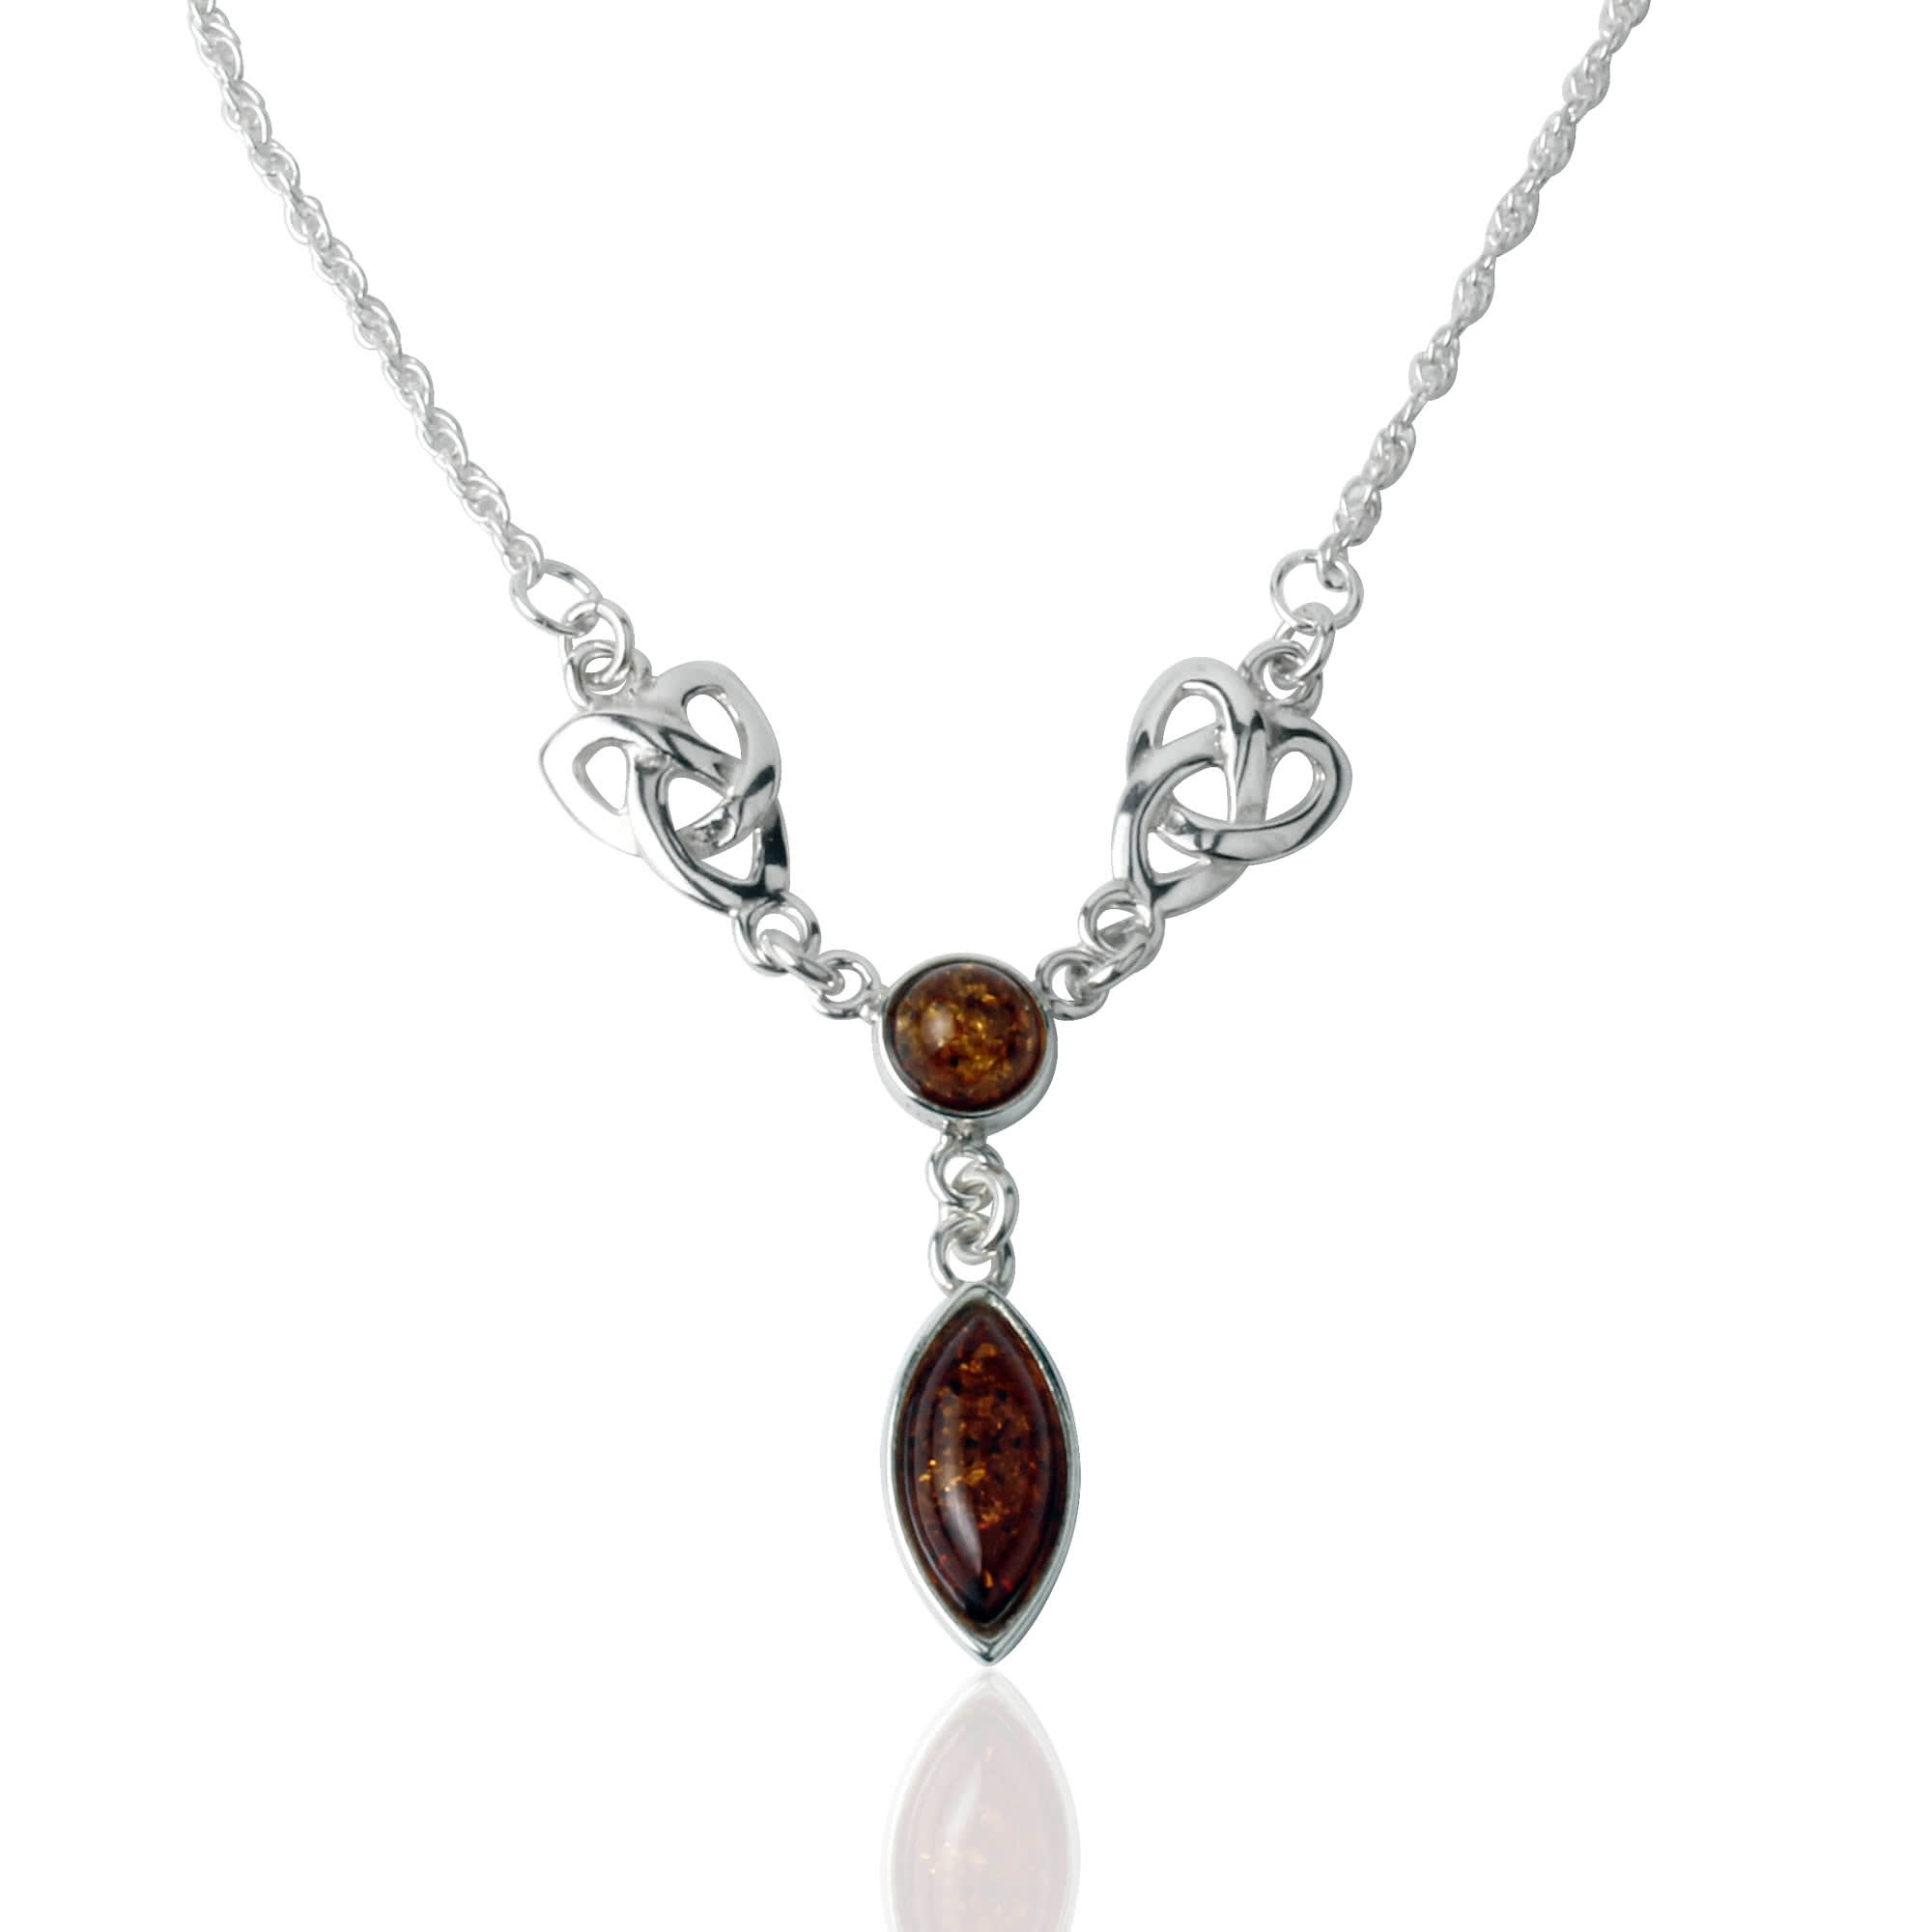 Amber Necklace - Celtic Knot Design in Silver